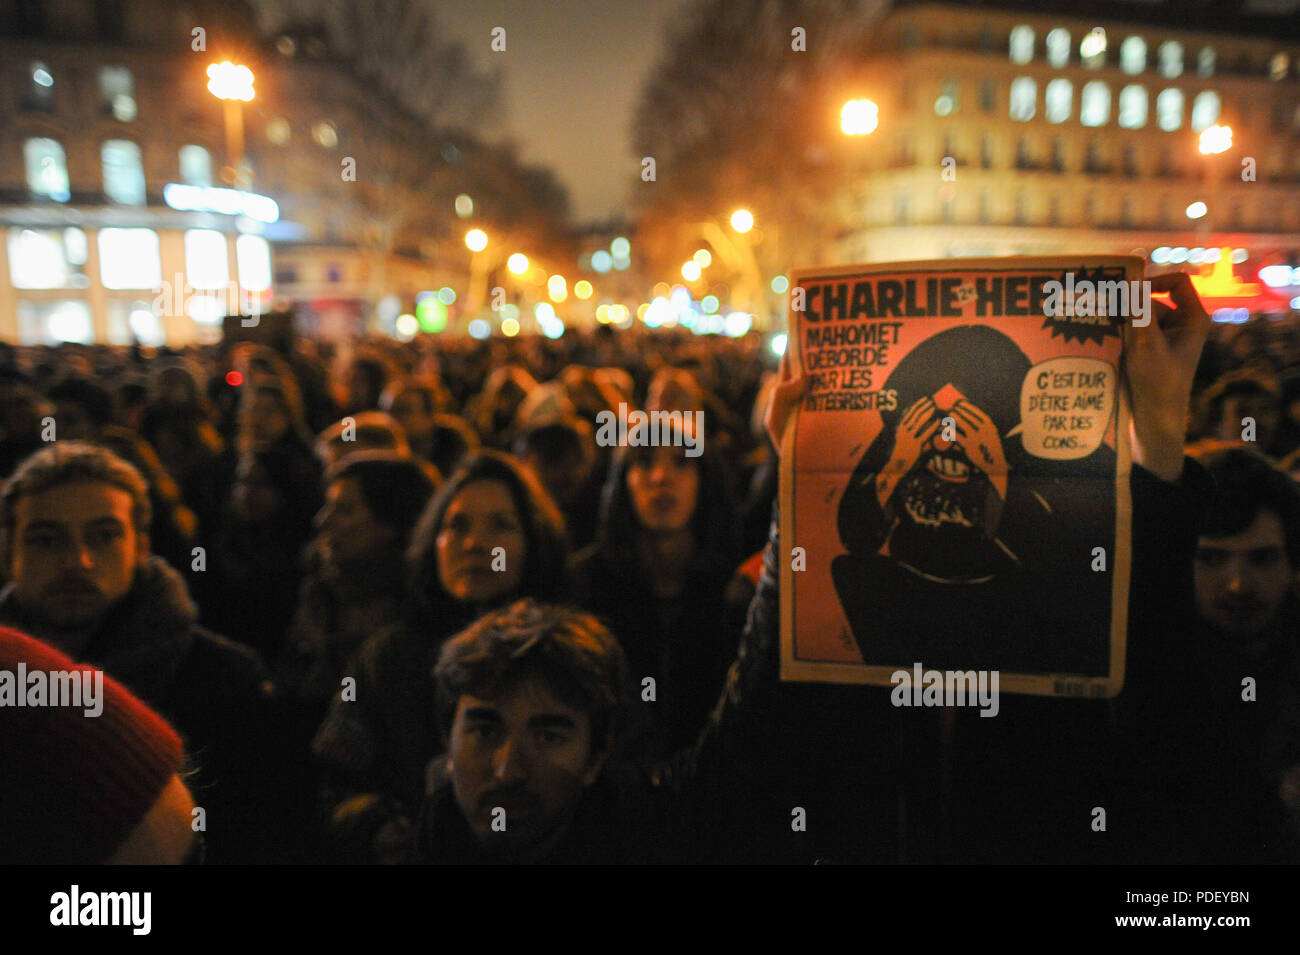 January 07, 2015 - Paris, France:  Tens of thousands of people gather in Place de la Republique in central Paris after a deadly attack on a French satirical magazine. Gunmen attacked the offices of French satirical weekly Charlie Hebdo in Paris on Wednesday, killing at least 12 people in what President Franois Hollande said was 'undoubtedly a terrorist attack'. Des dizaines de milliers de personnes se rassemblent place de la Republique en hommage aux victimes de l'attentat contre Charlie Hebdo, quelques heures apres la fusillade meurtriere. *** FRANCE OUT / NO SALES TO FRENCH MEDIA *** Stock Photo